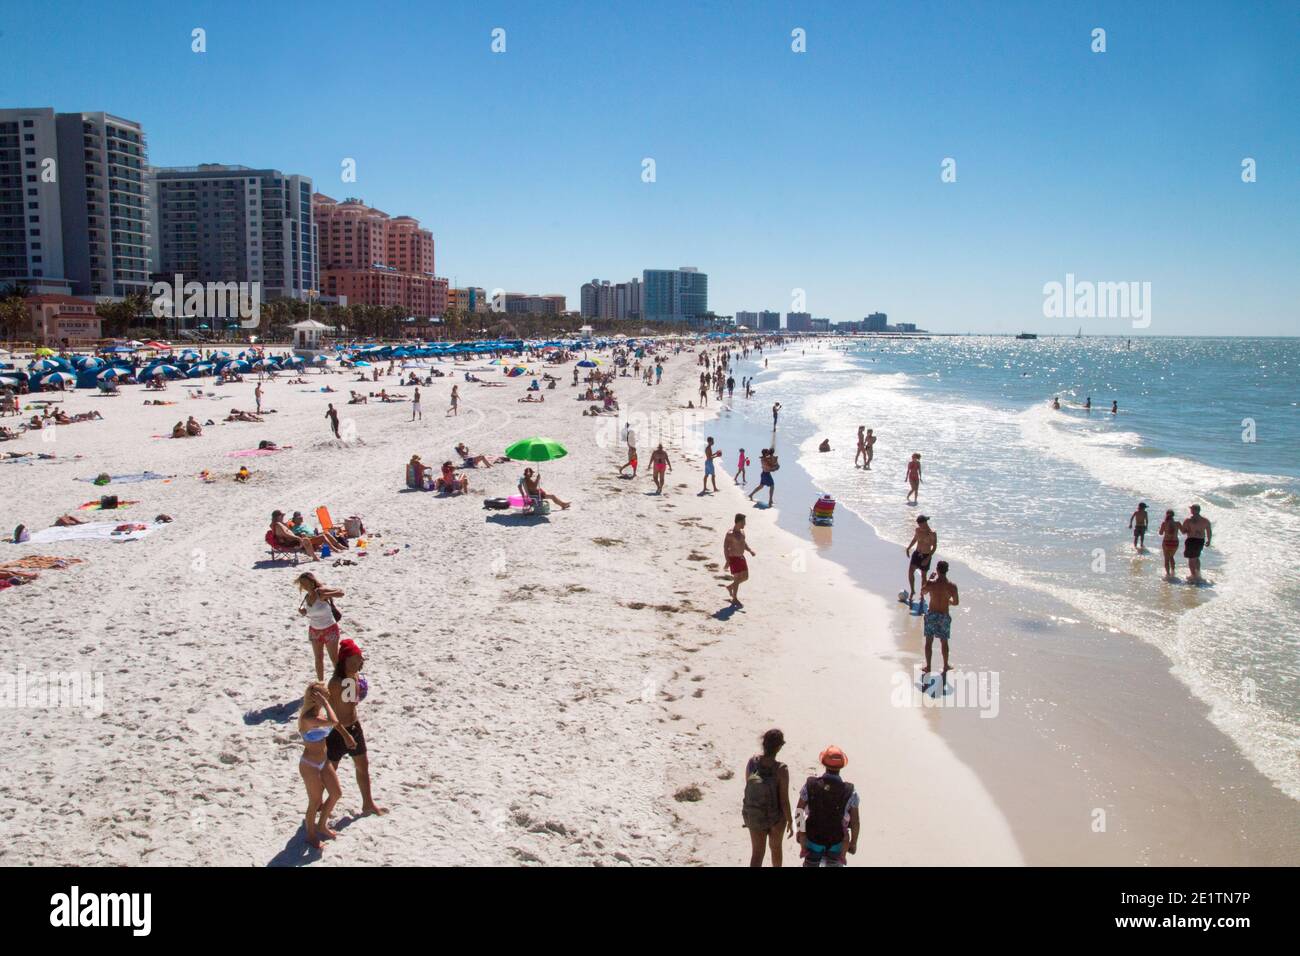 Crowded beach by sunbathing and walking people on holidays, exotic sandy beach vacation, tourists Florida Clearwater beach view Stock Photo